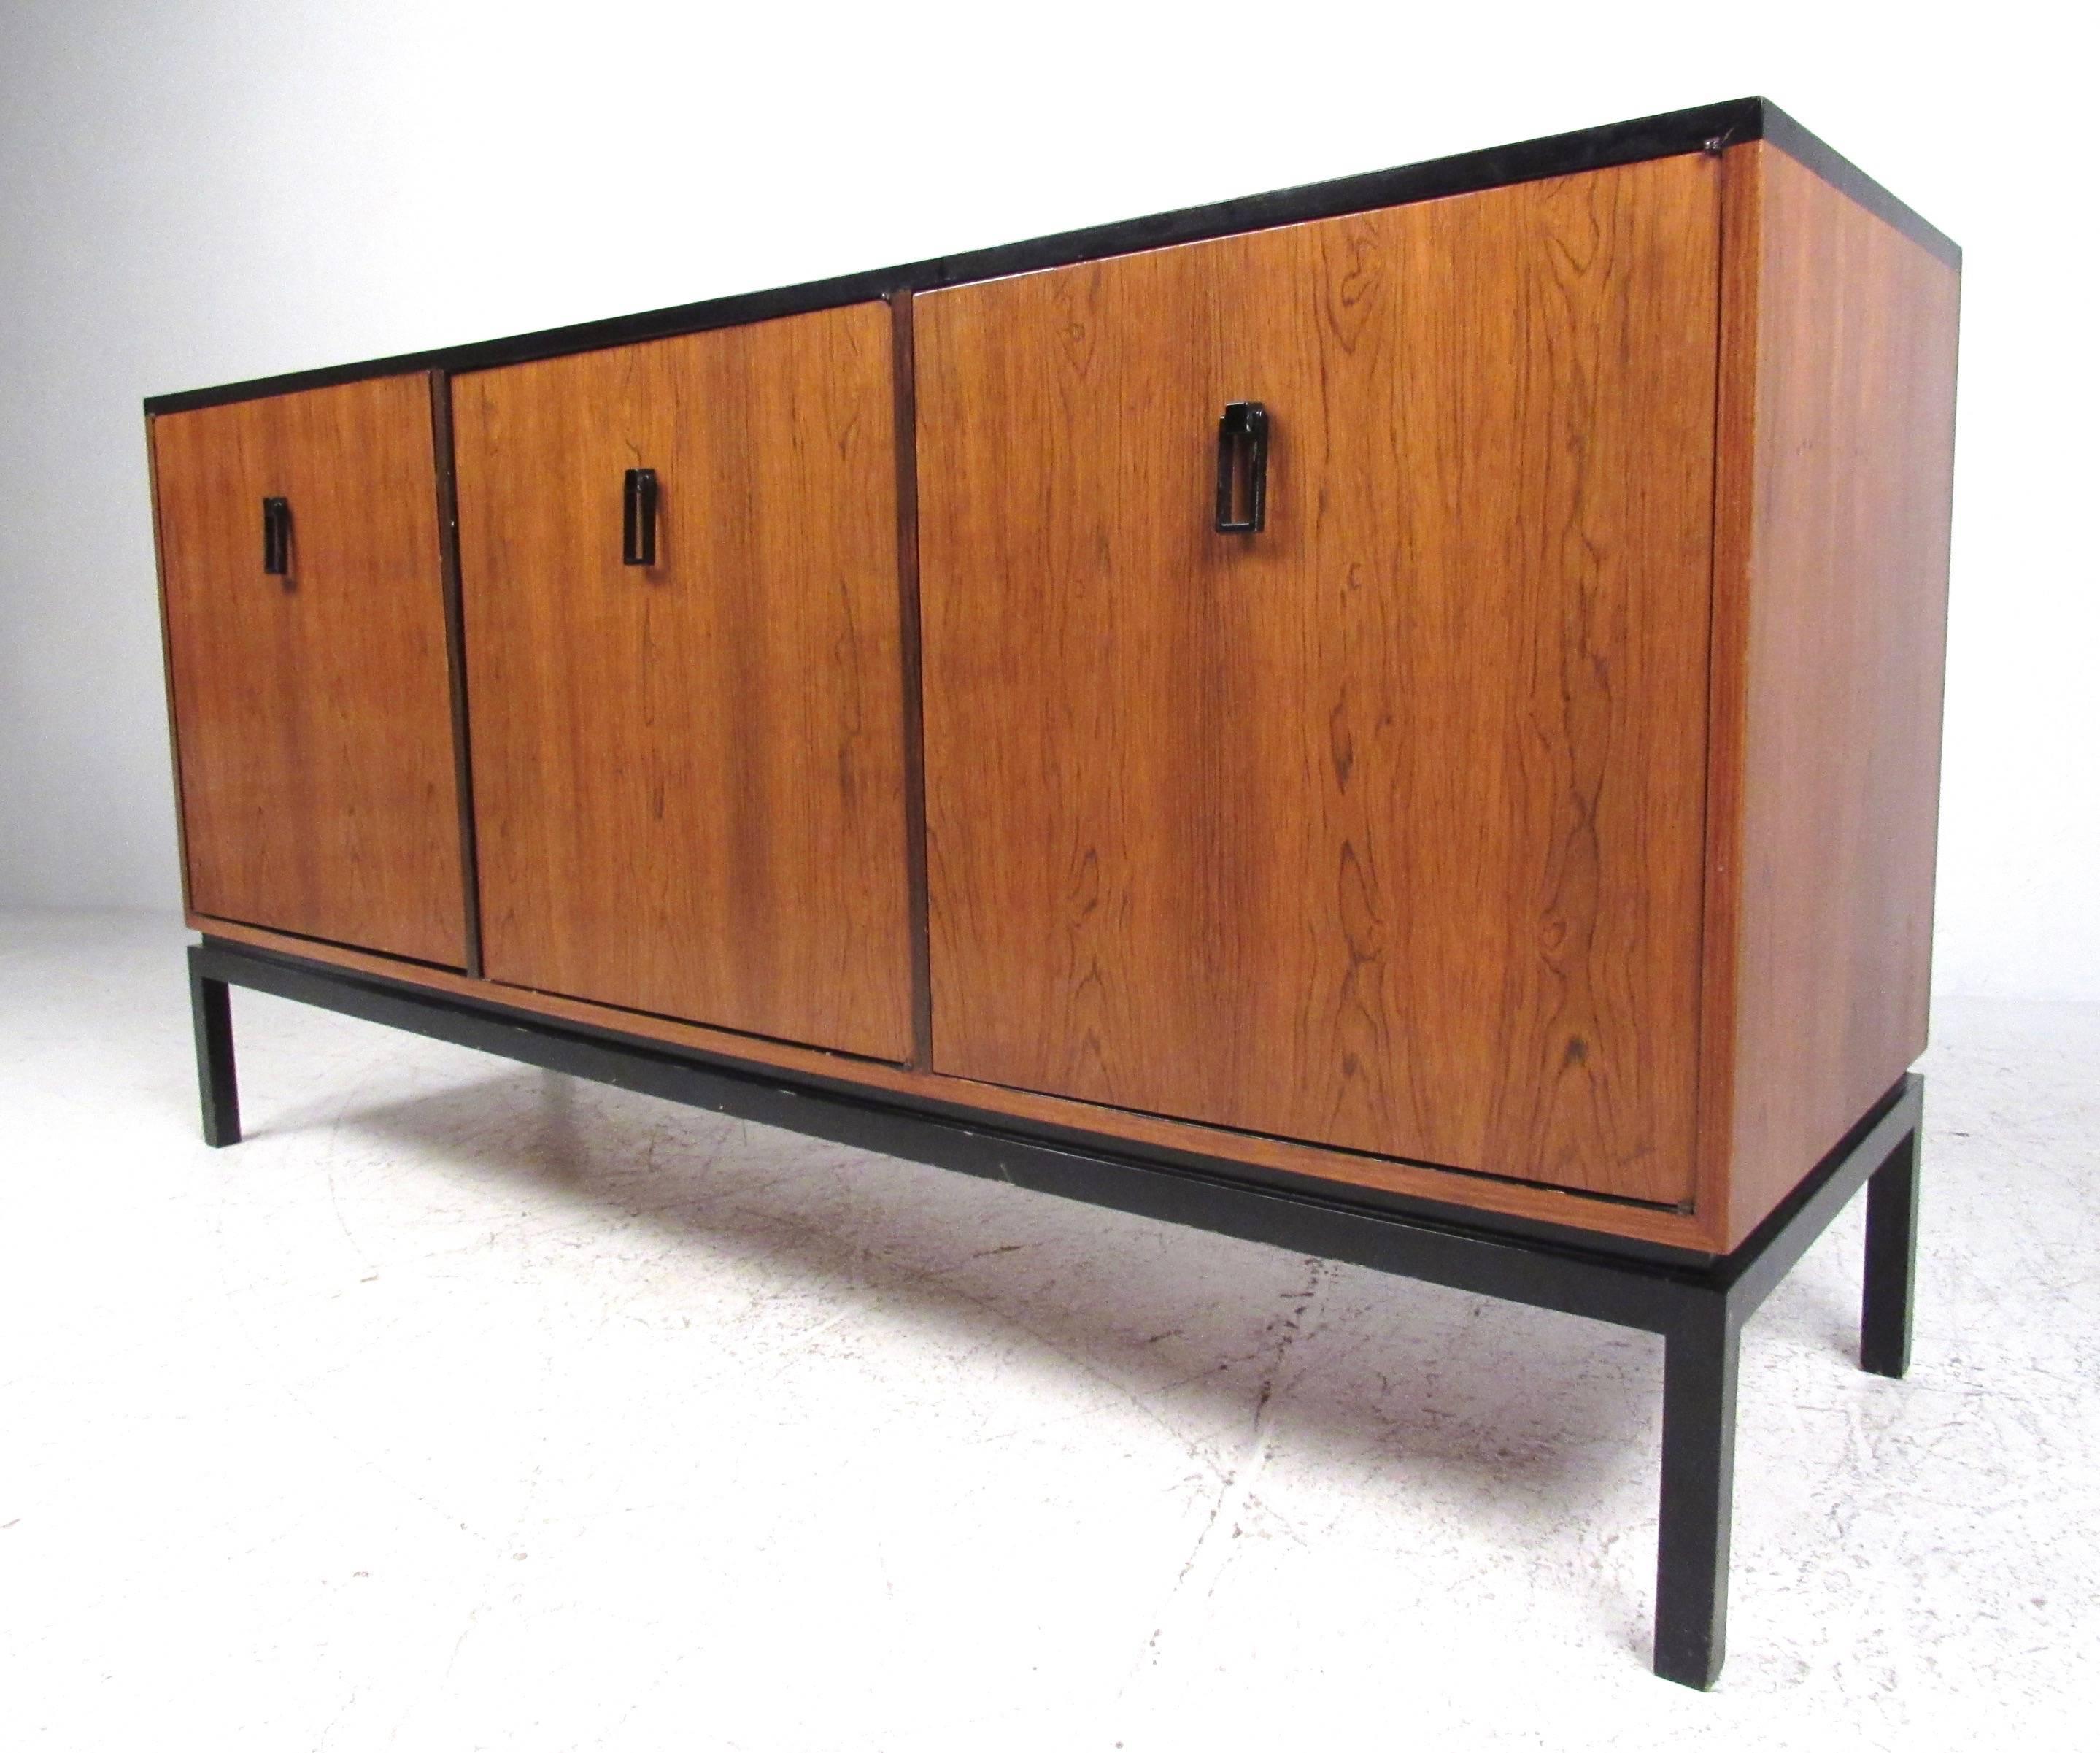 This vintage modern Dunbar credenza features a lacquered hard wood base, spacious interior cabinets, and unique metal pulls. This beautiful Mid-Century piece is perfect for use as a television console, dining room sideboard, or for occasional office